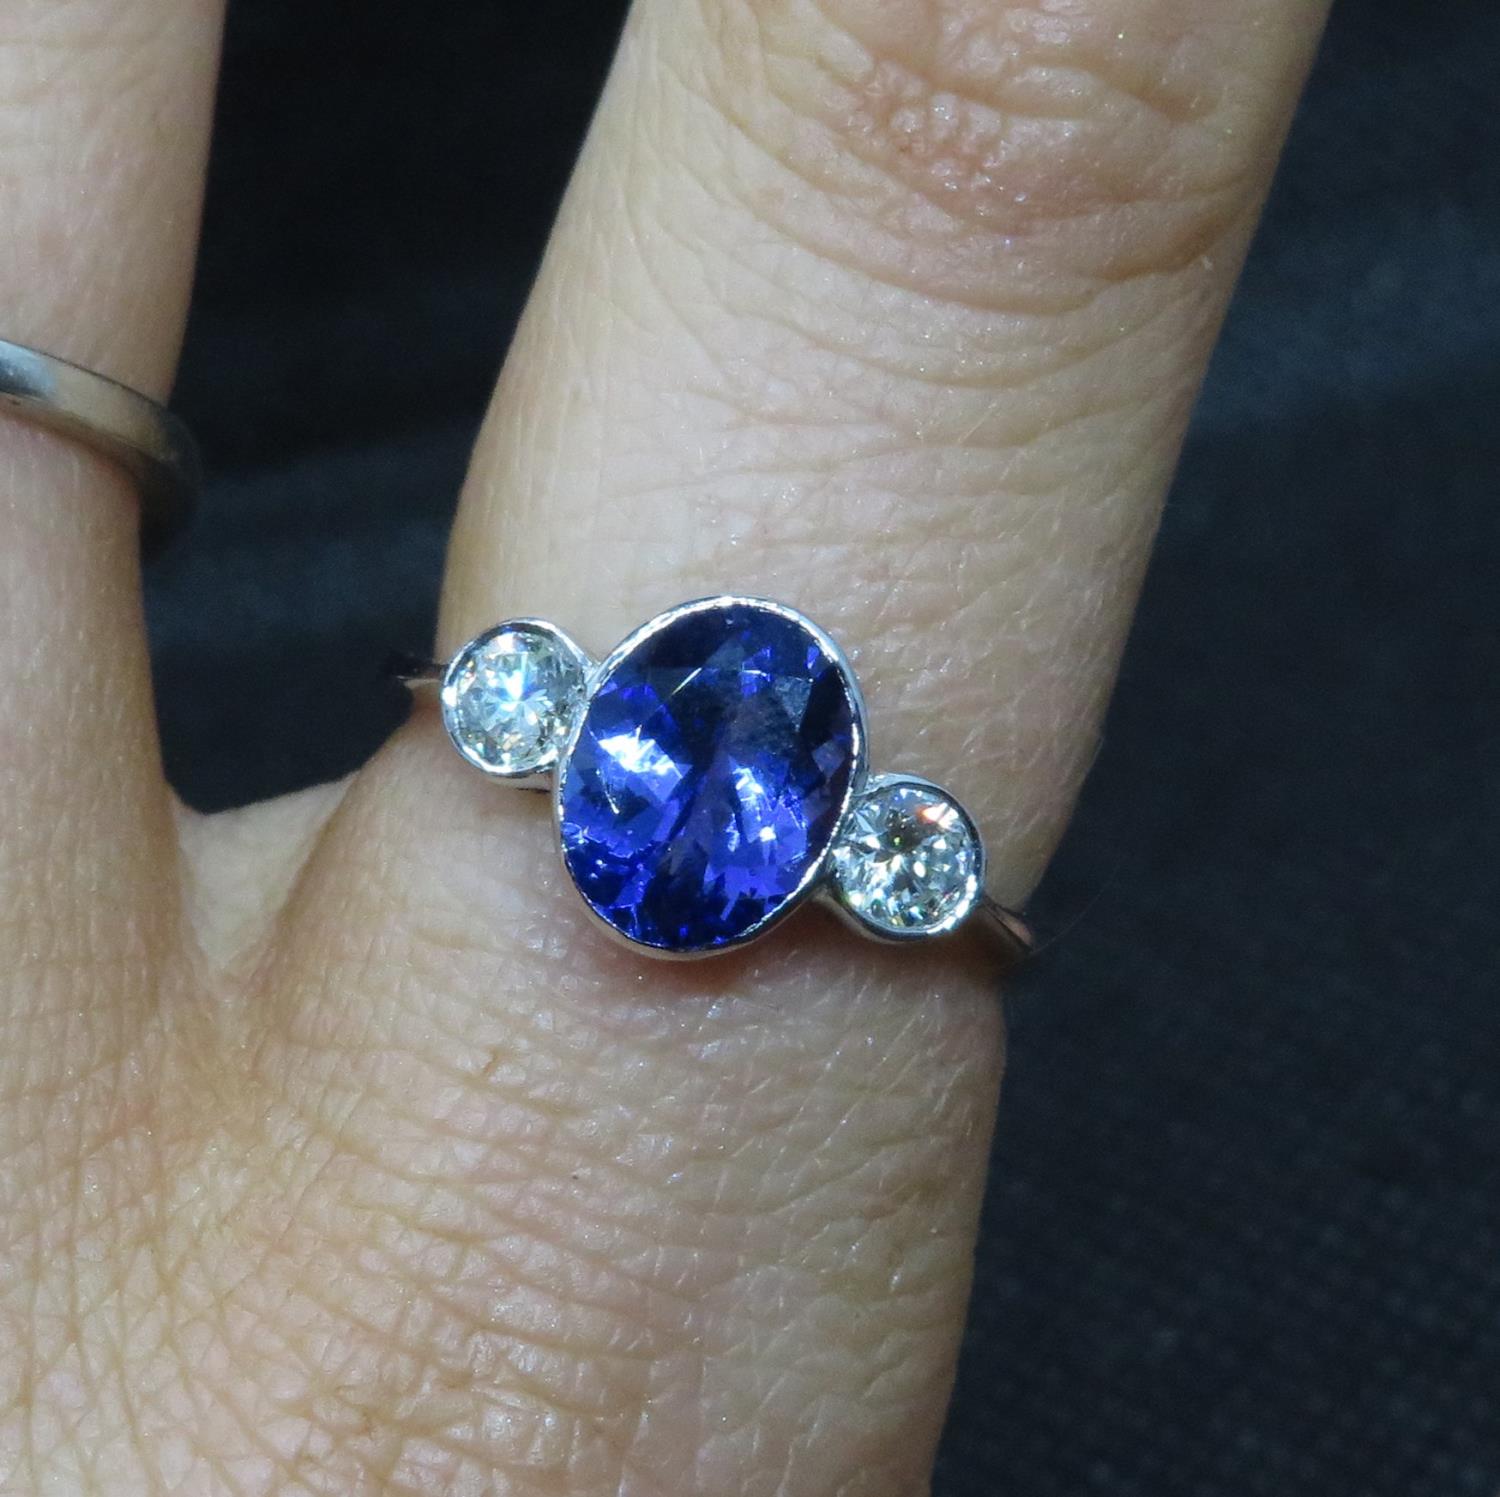 Tanzanite diamond and platinum ring with 2x 0.2ct diamonds and natural tanzanite est weight 2cts. - Image 5 of 5